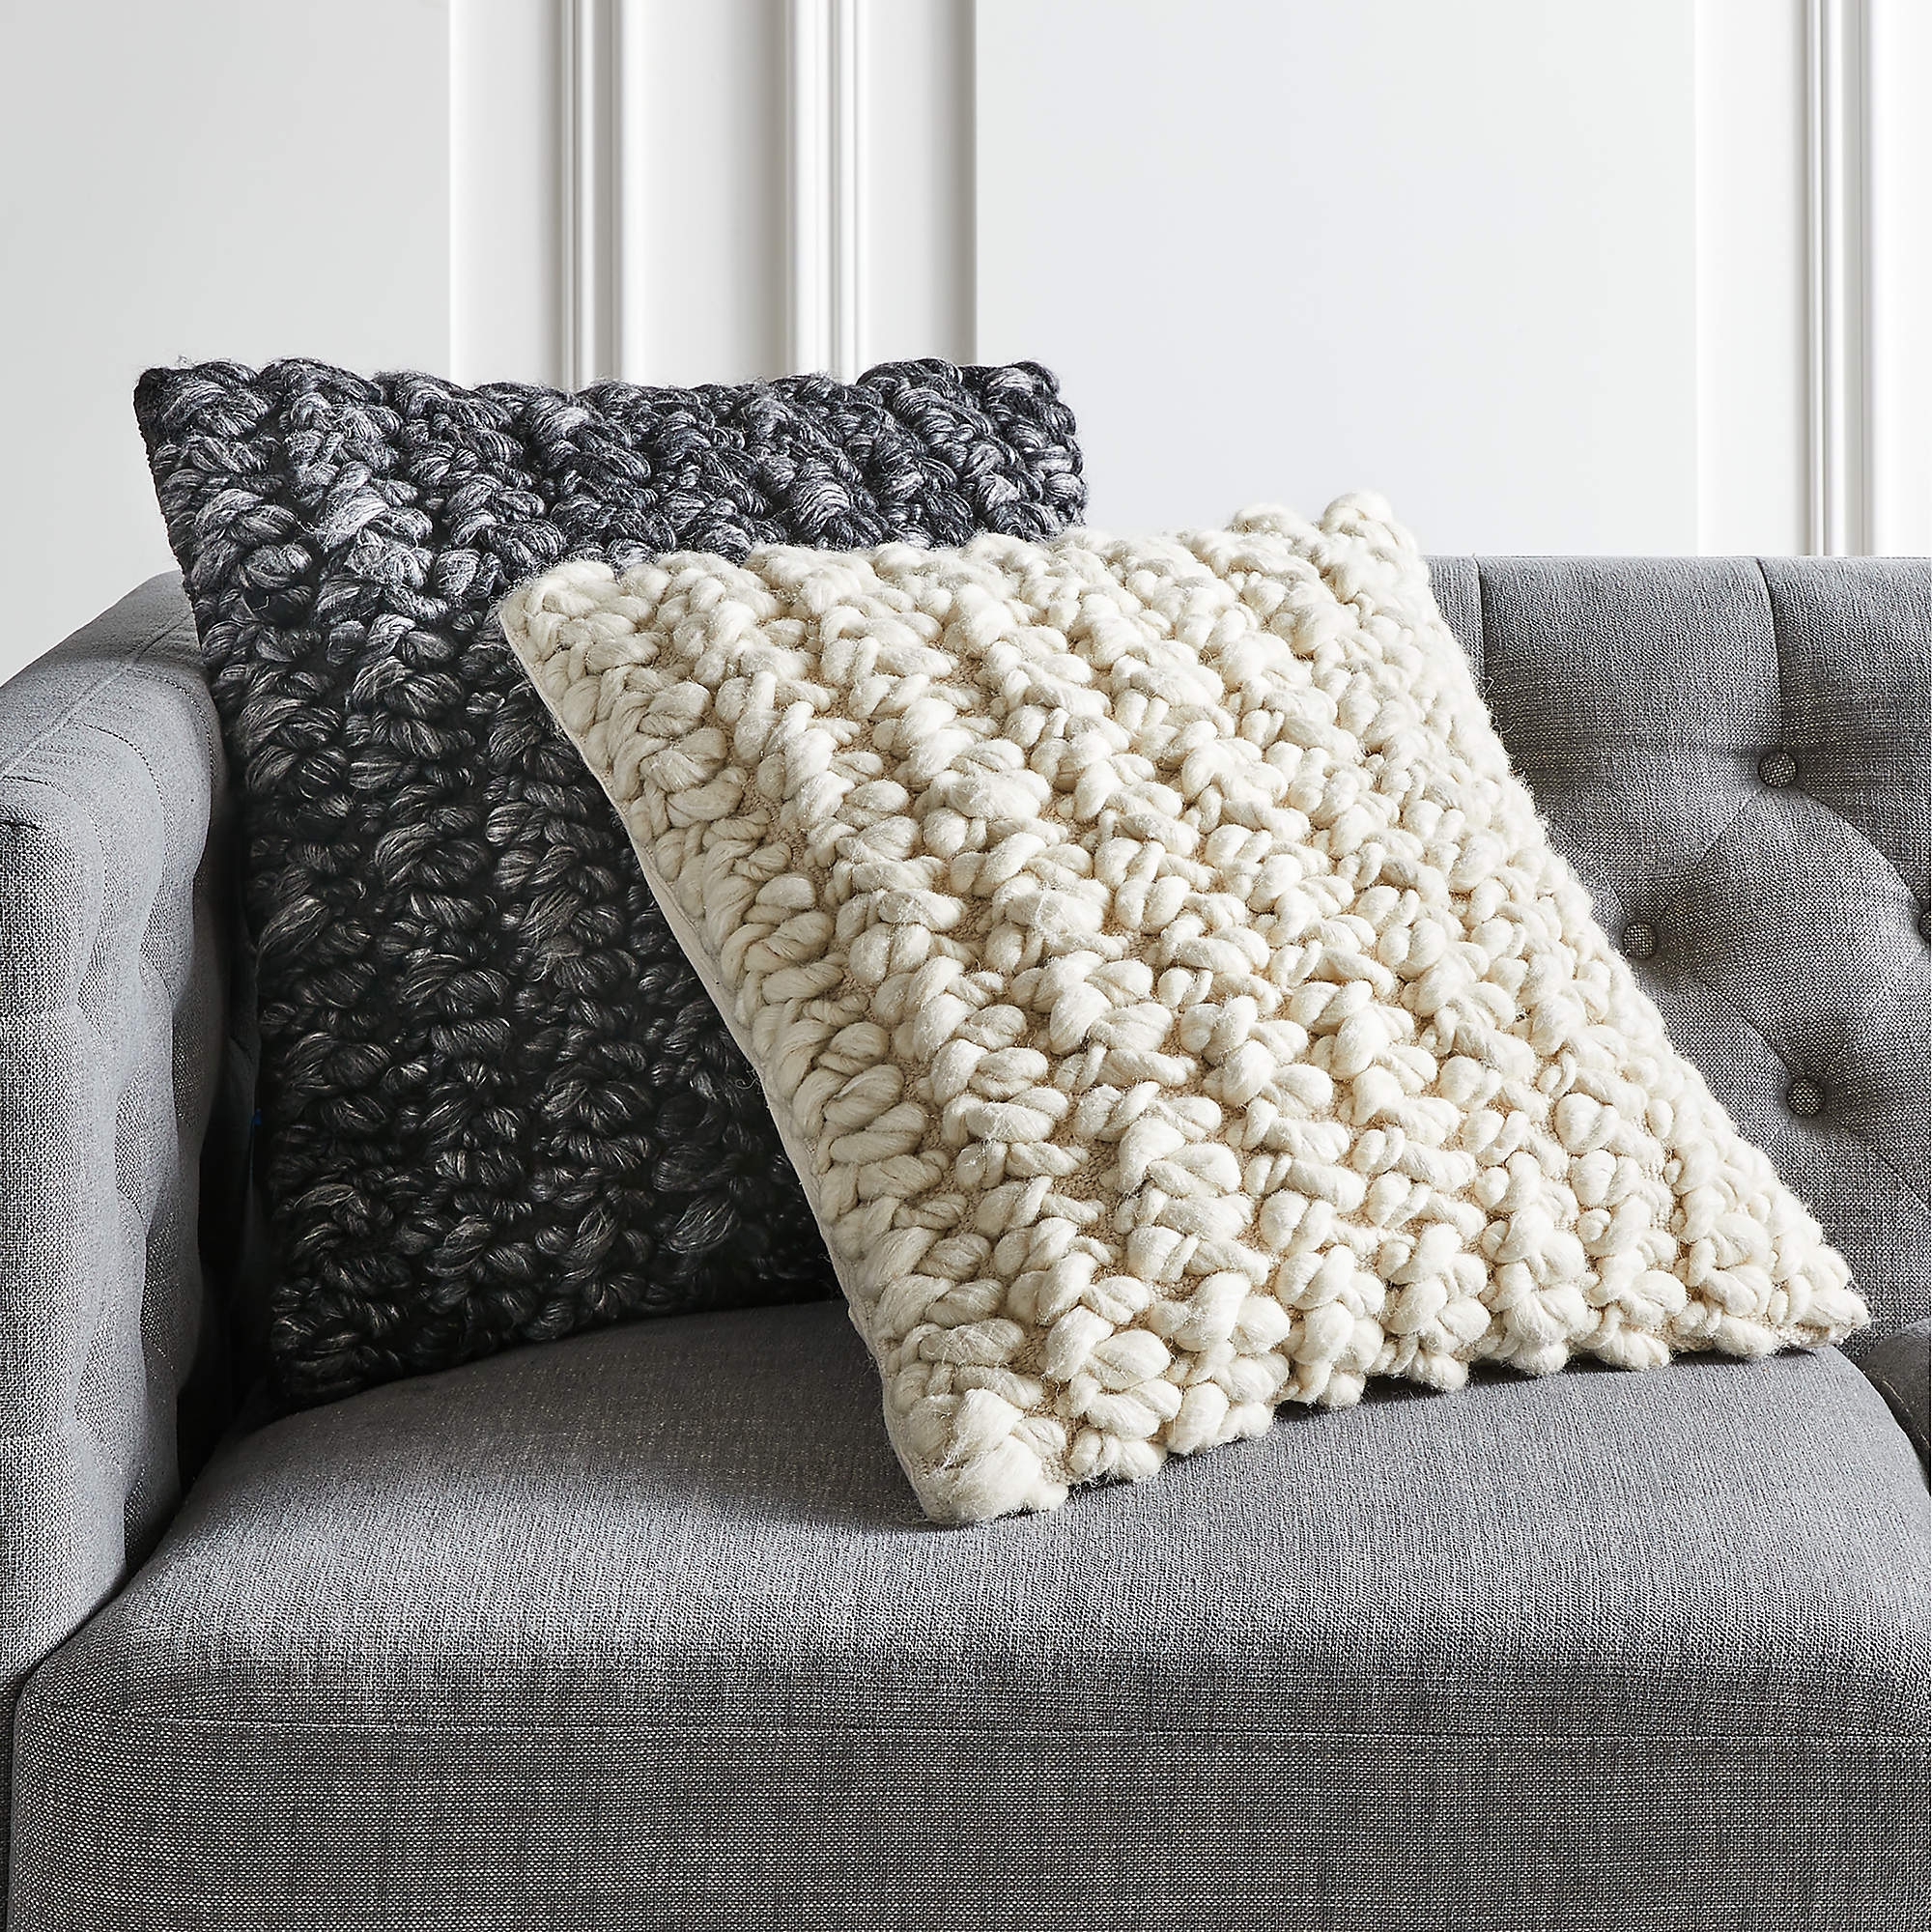 Tillie Wool Pillow, Ivory, 20" x 20" Feather-Down Insert - Image 2